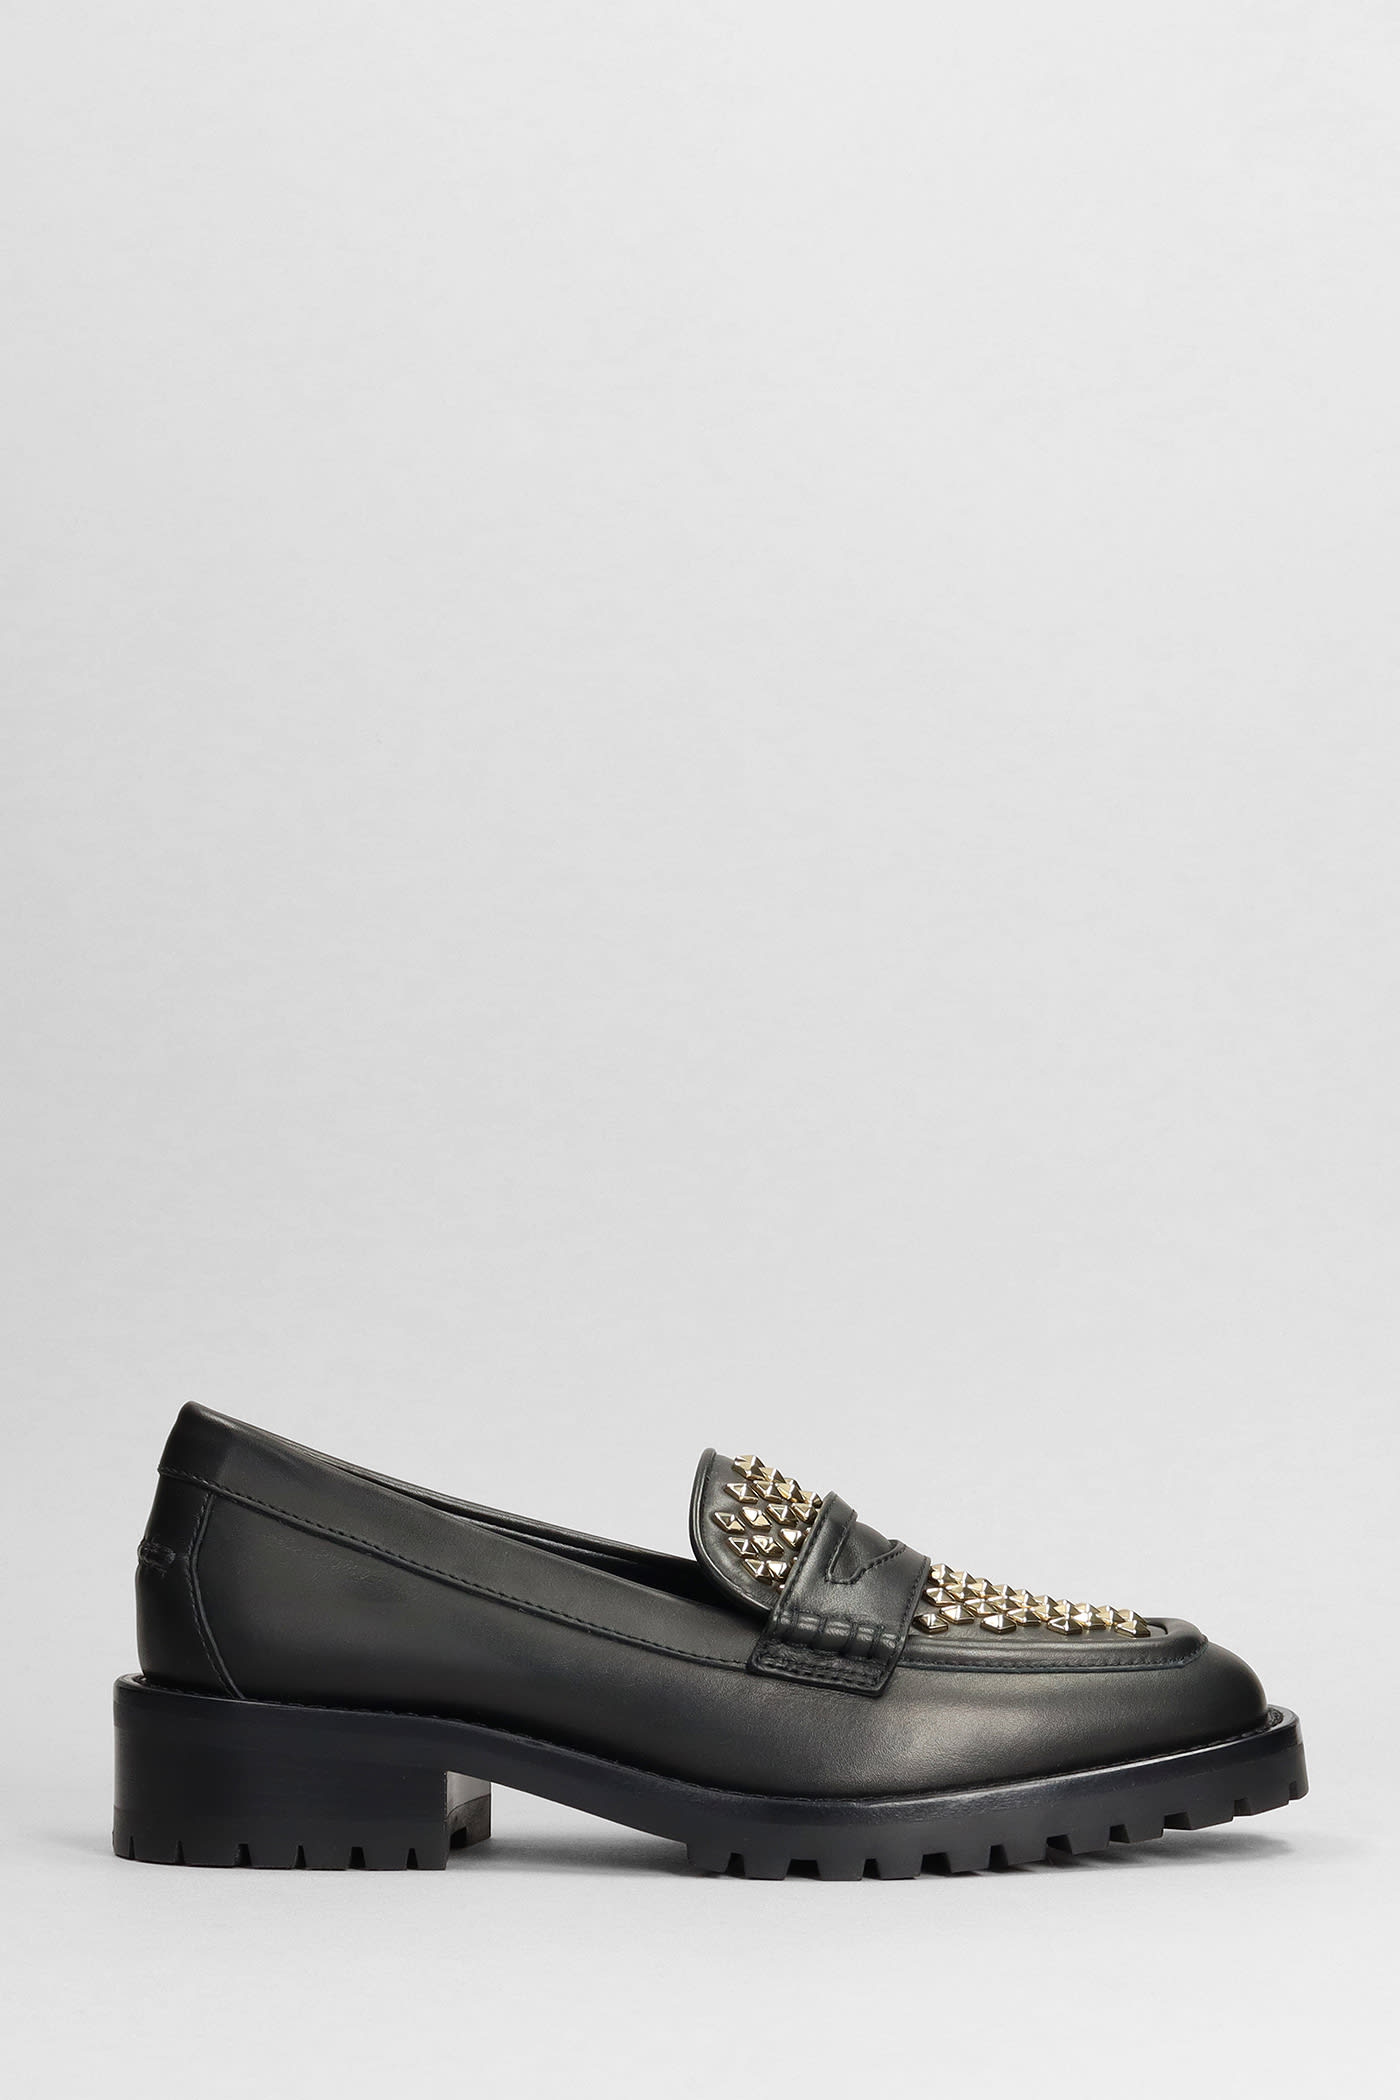 Jimmy Choo Deanna Loafers In Black Leather